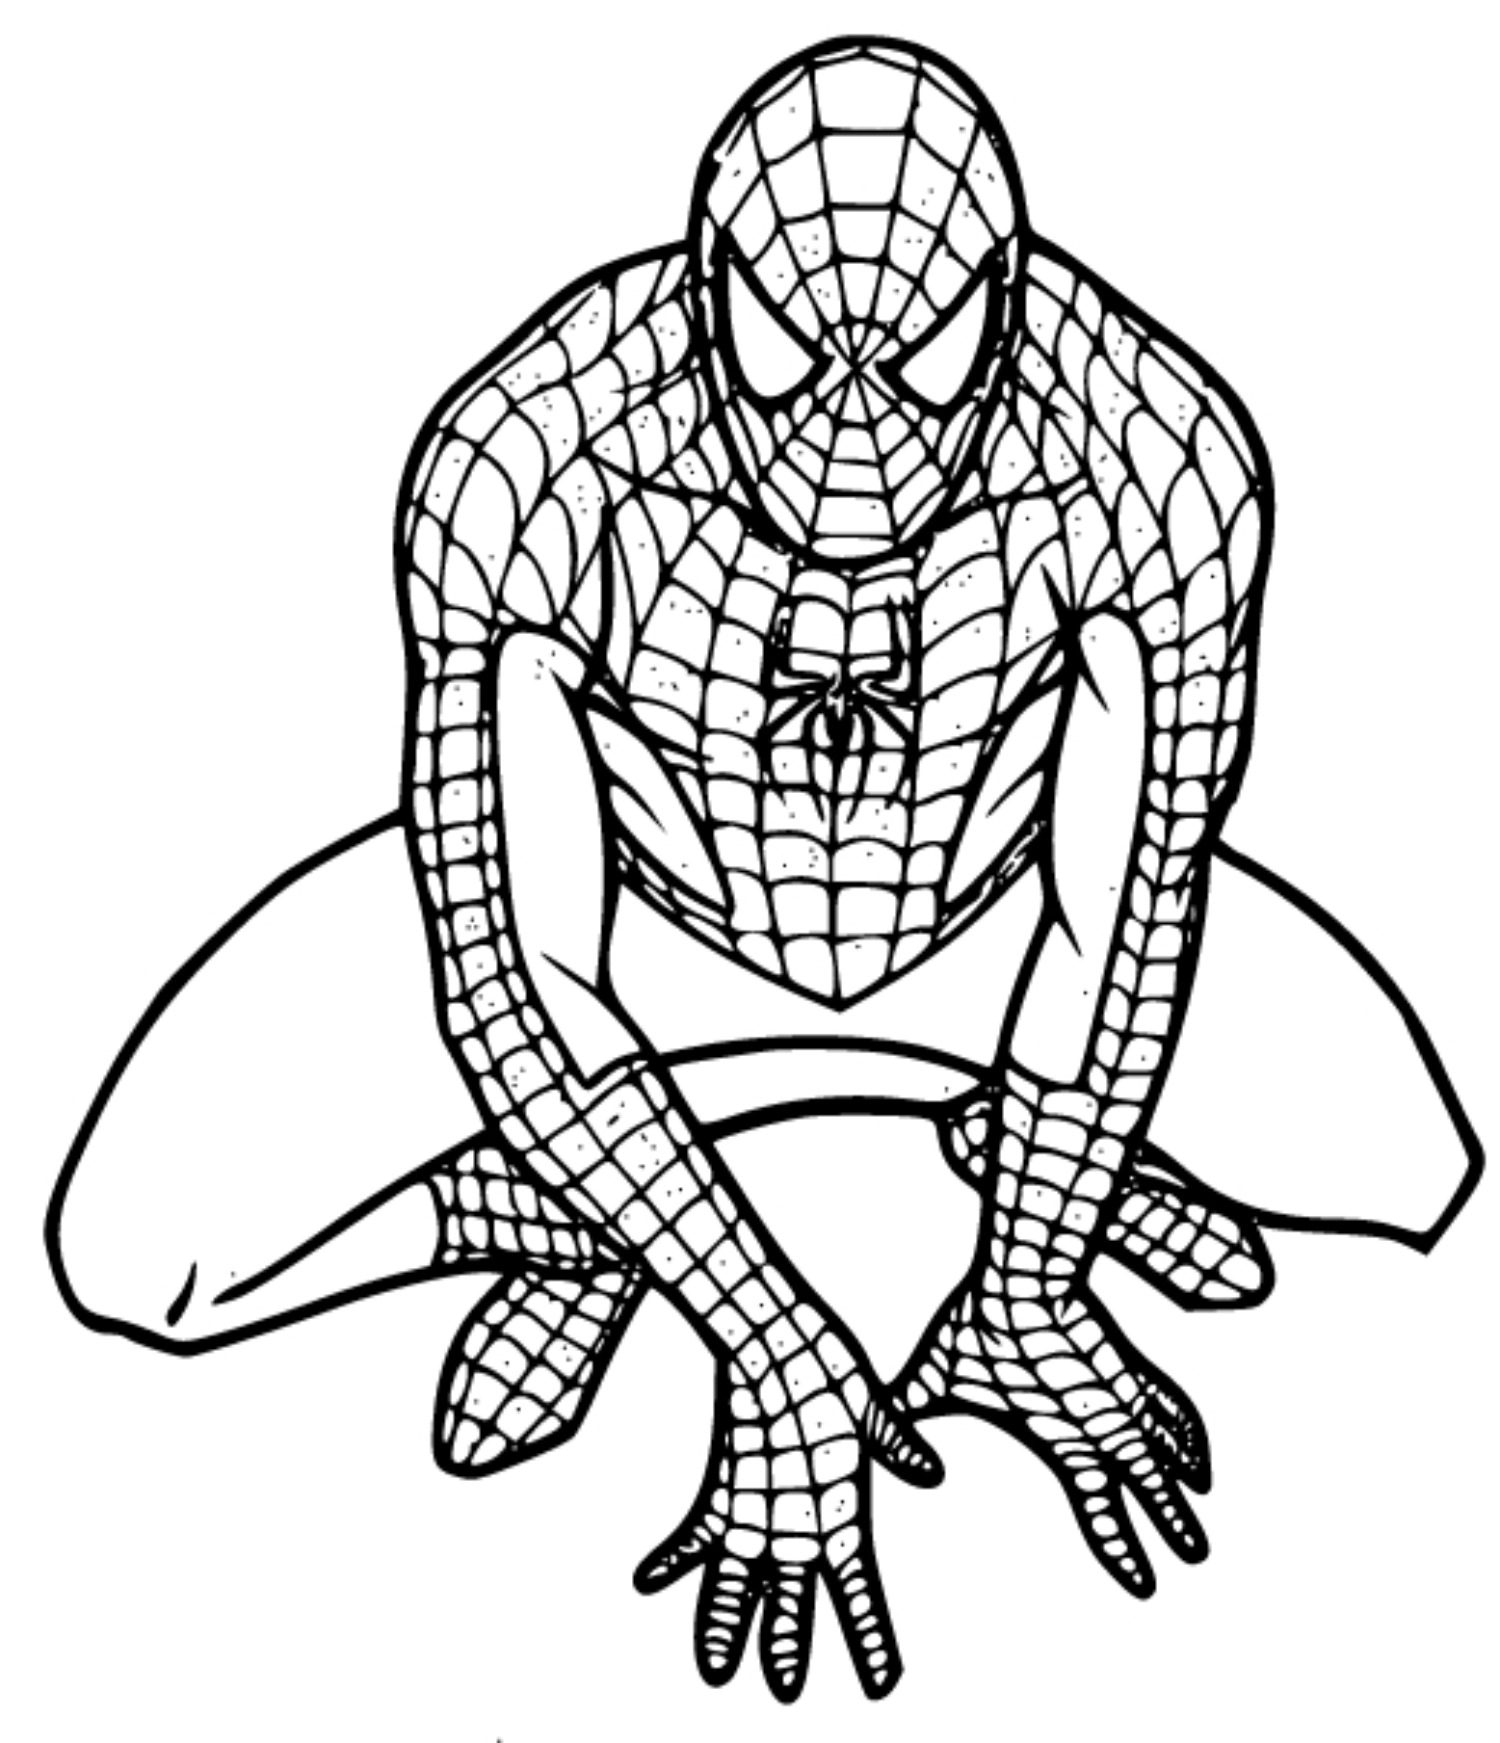 Spiderman Sitting Coloring Pages for Kids to Print - SheetalColor.com